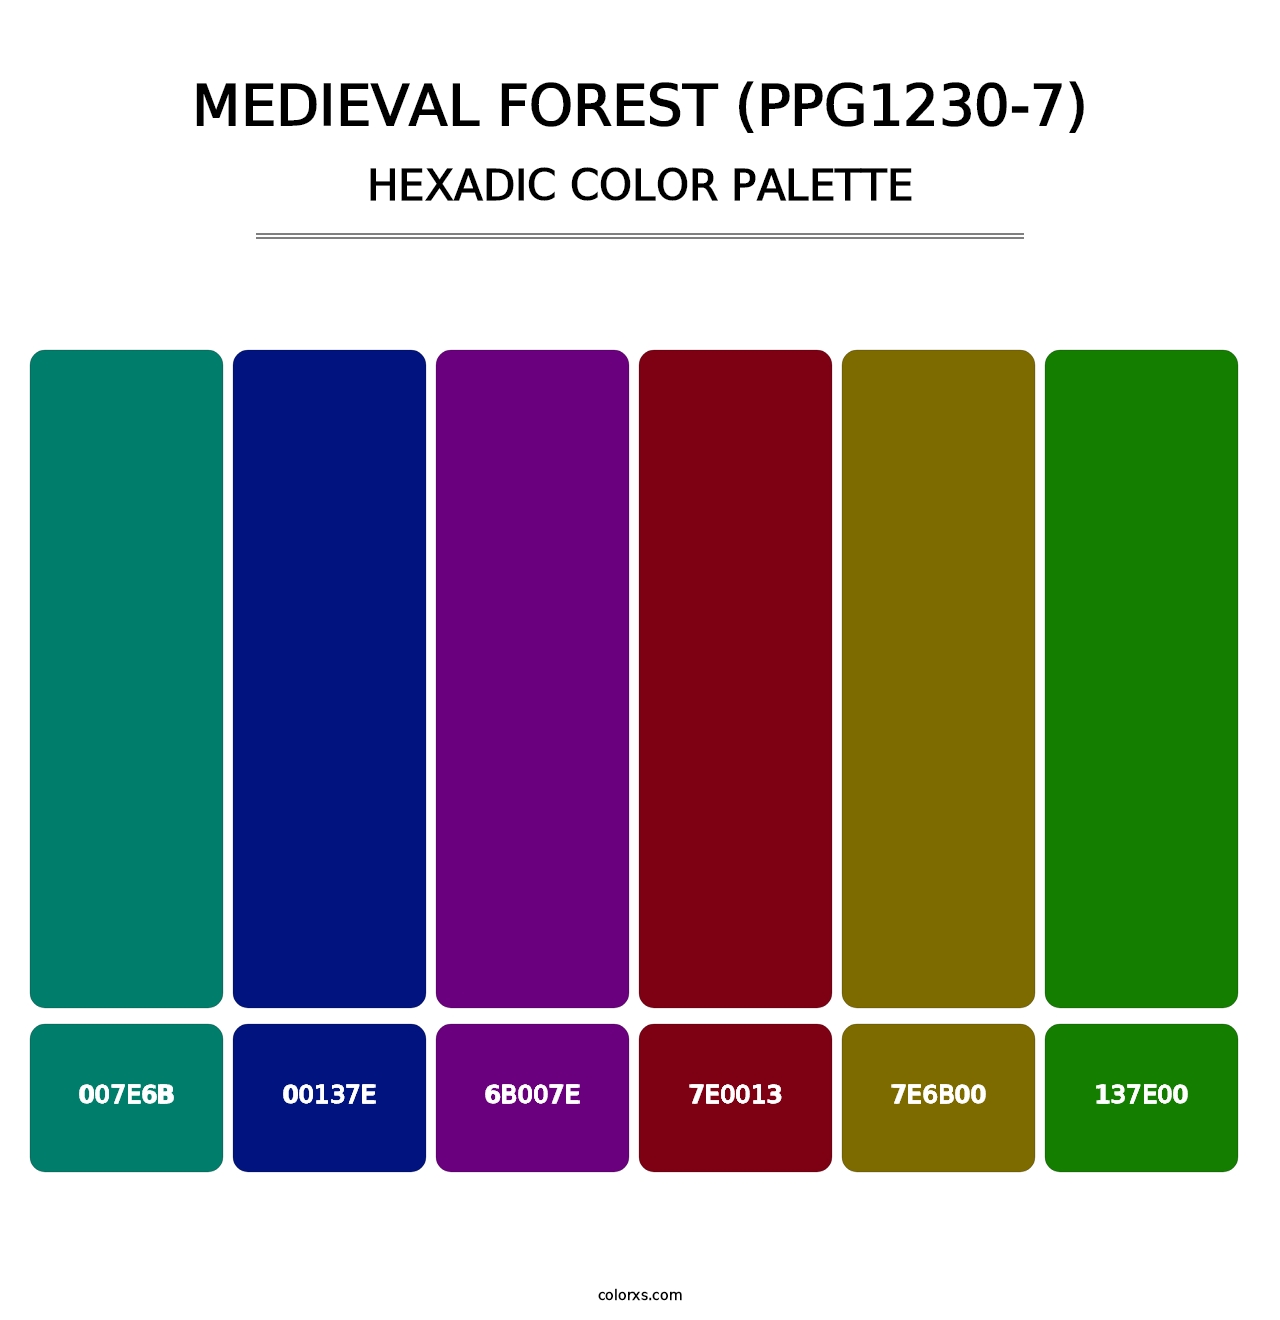 Medieval Forest (PPG1230-7) - Hexadic Color Palette